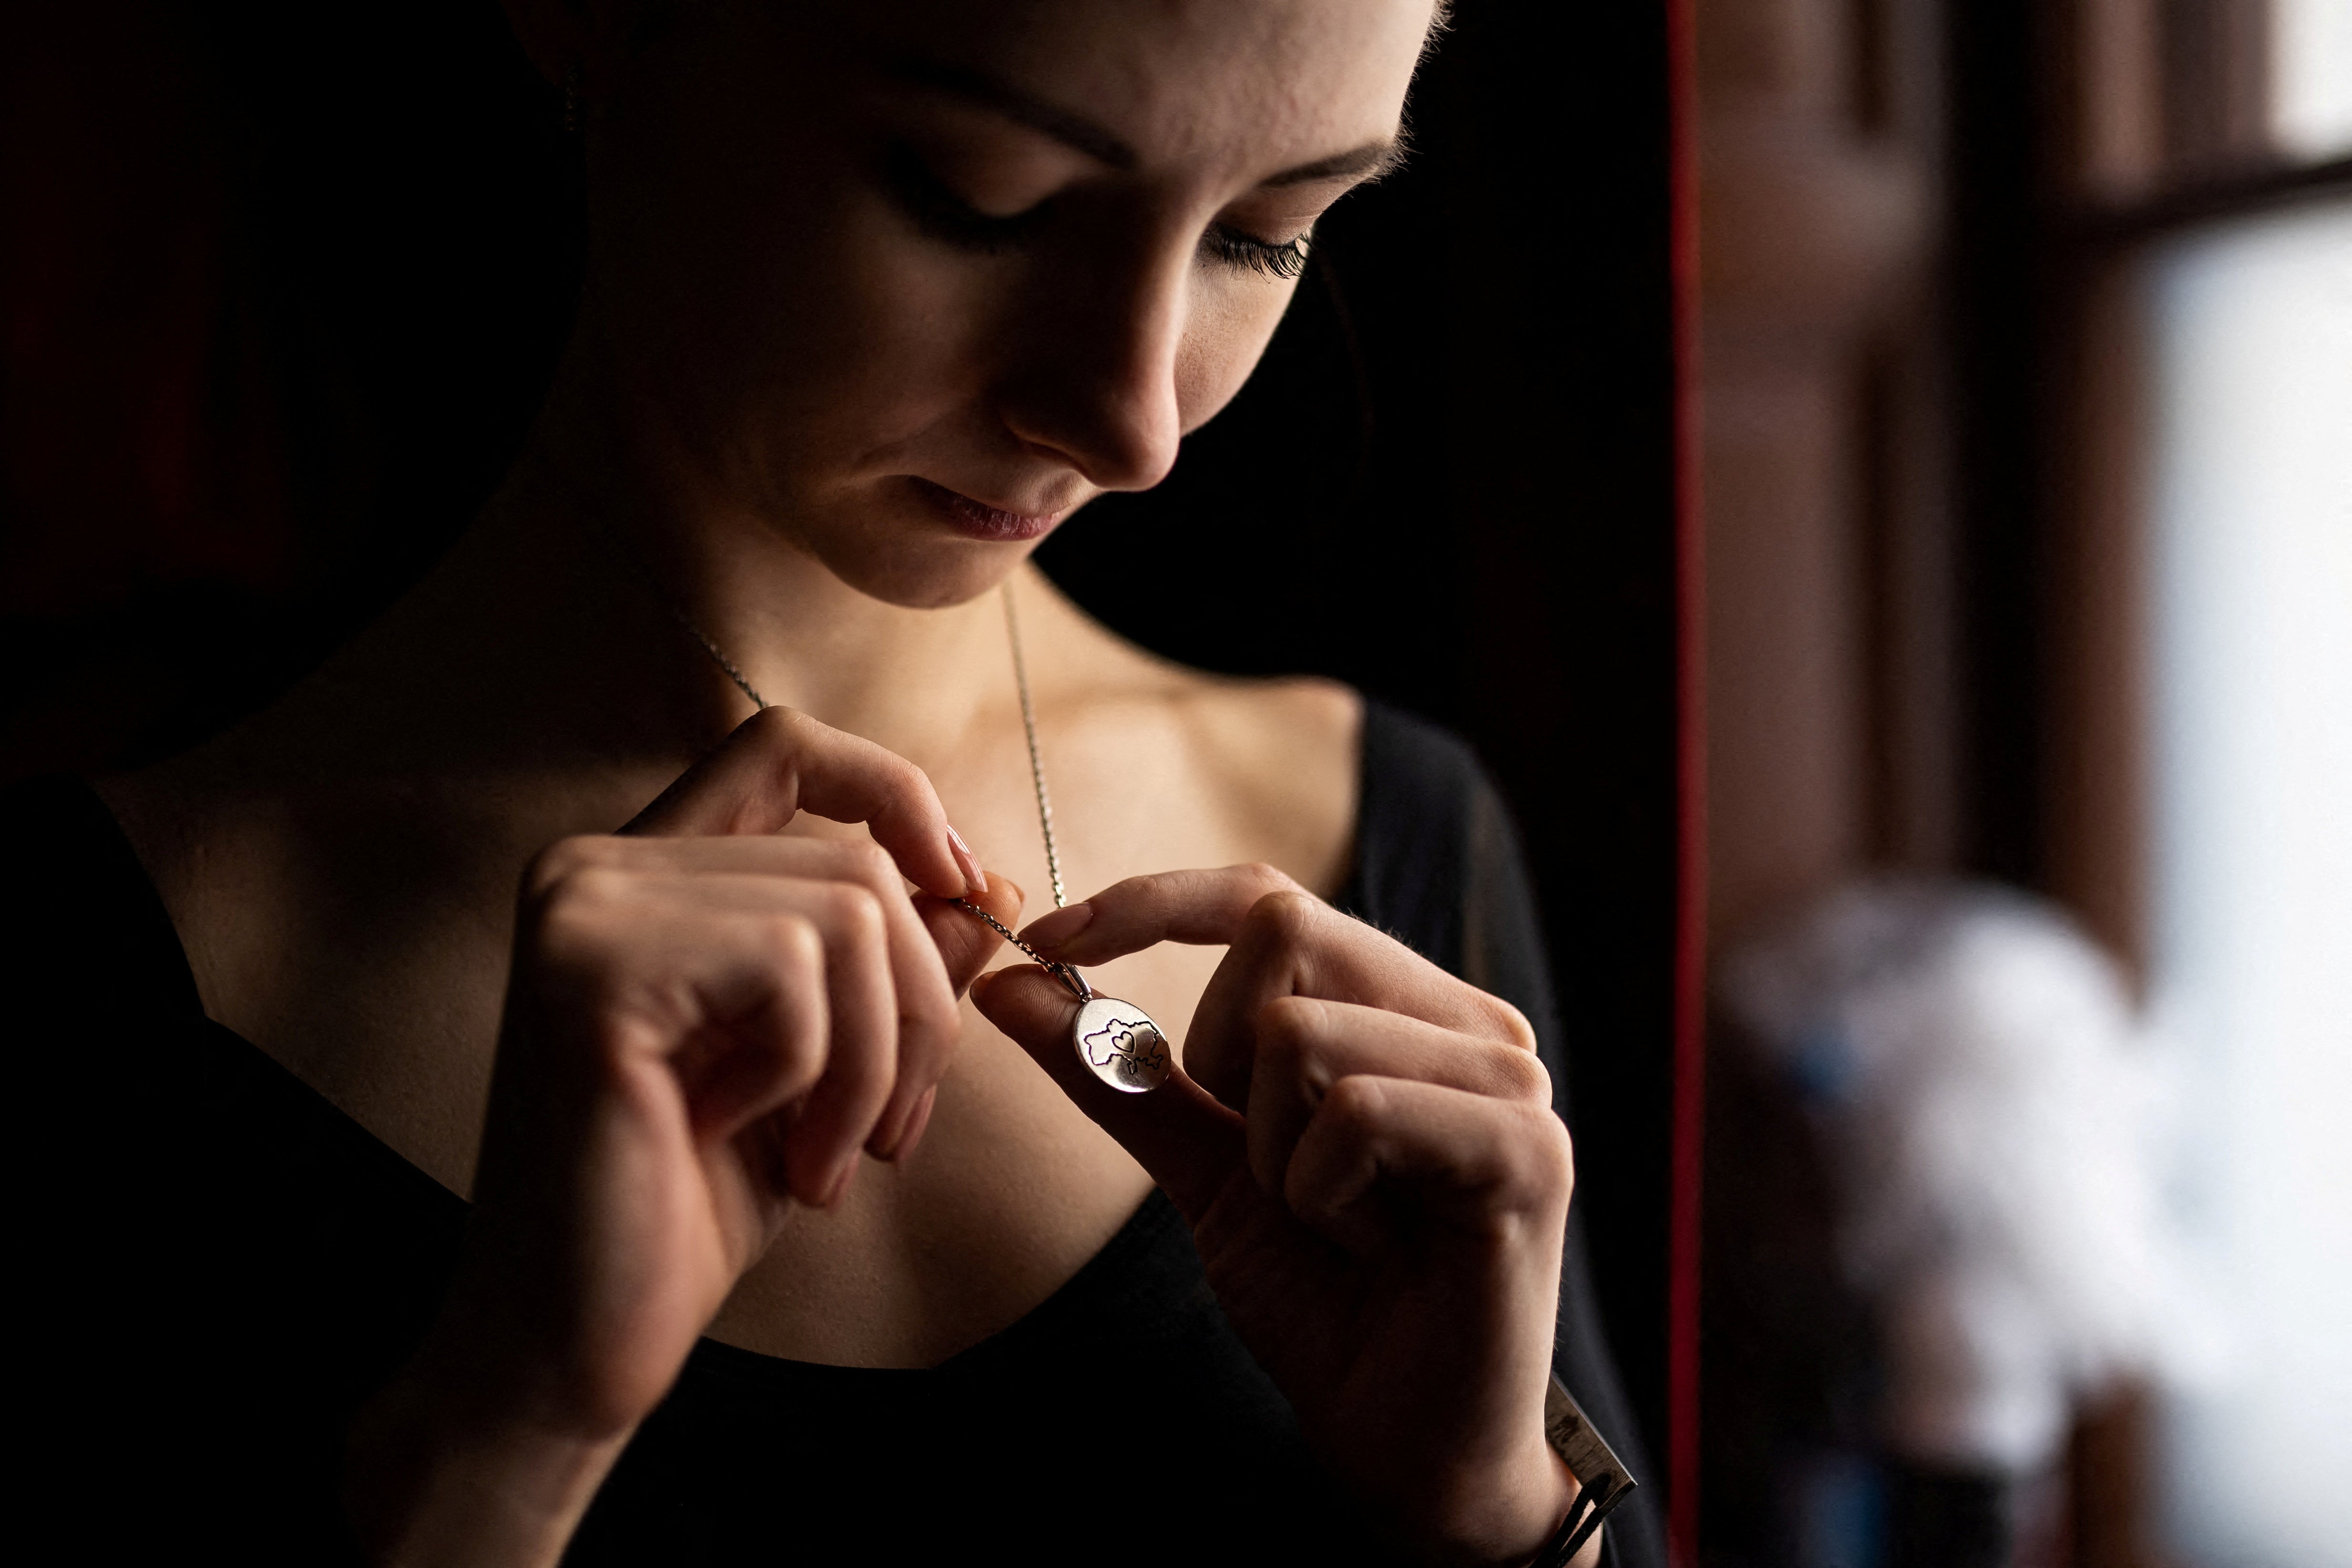 The dancer looks at her necklace, which is engraved with a map of her country, after a stage rehearsal